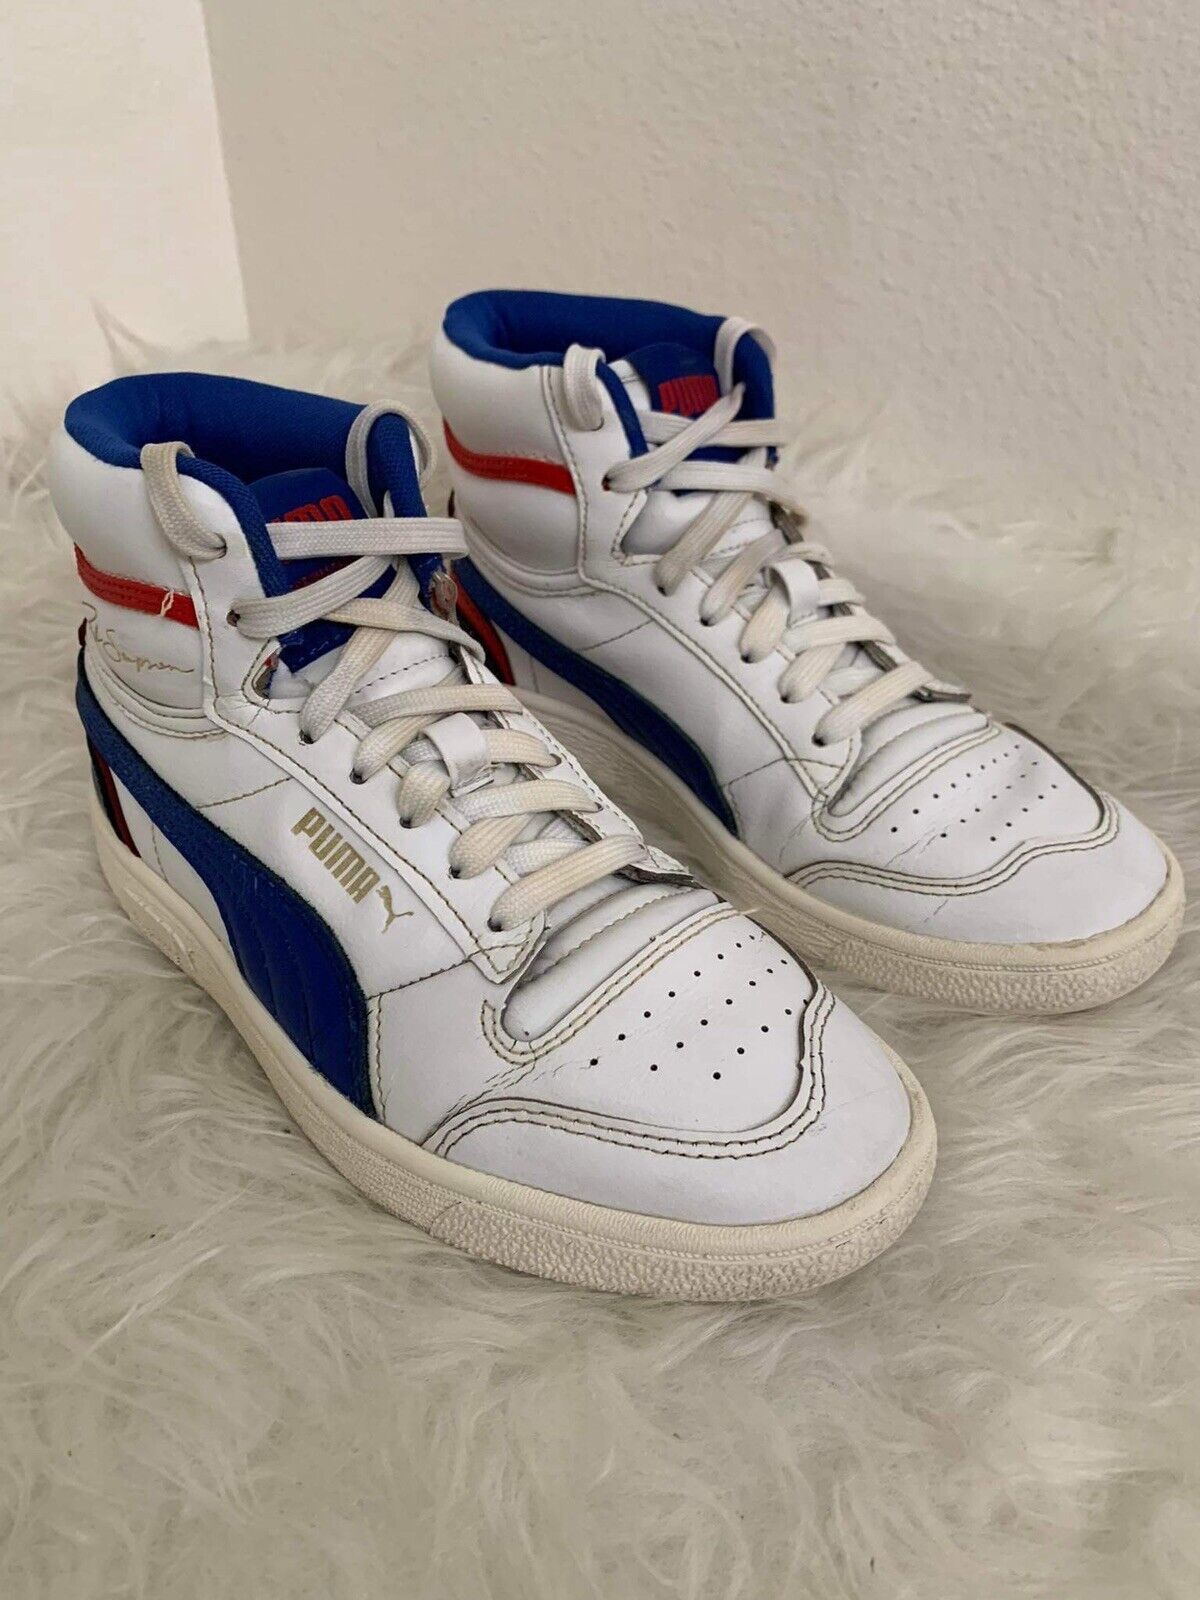 Men&#039;s Puma Ralph Sampson White Red Blue Casual Shoes Size US | eBay